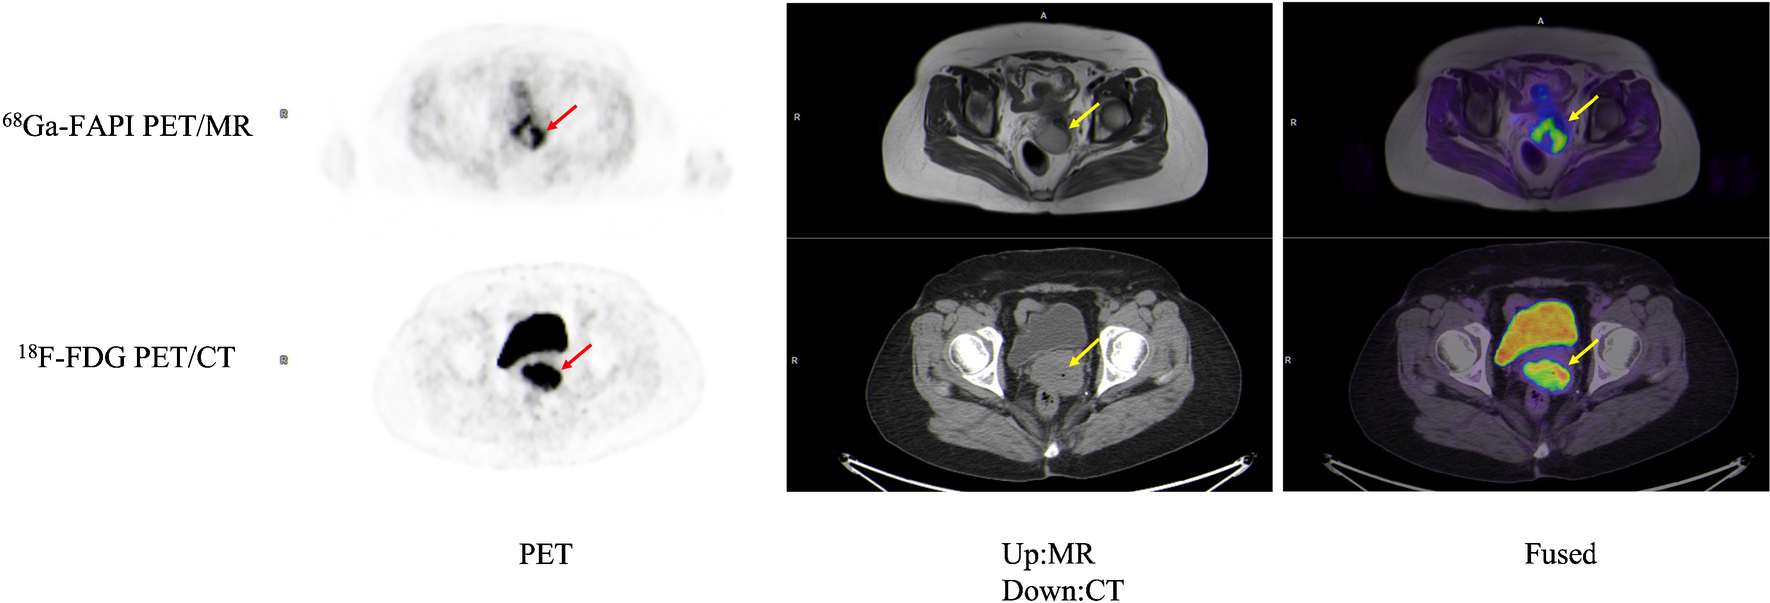 Comparison of the diagnostic value of [68 Ga]Ga-FAPI-04 PET/MR and [18F]FDG PET/CT in patients with T stage ≤ 2a2 uterine cervical cancer: a prospective study